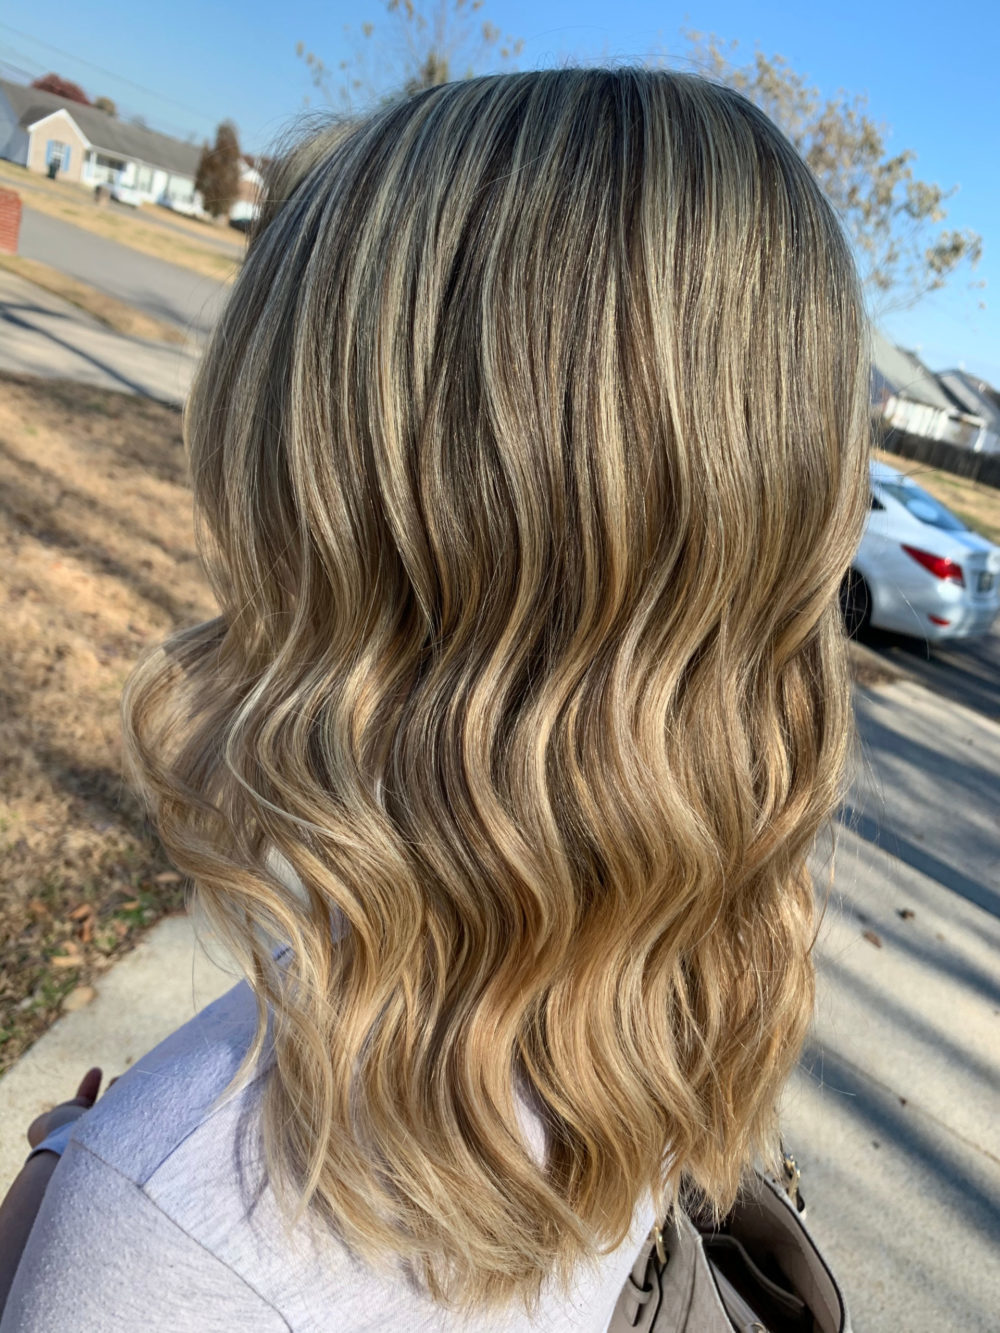 Medium Brown With All-Over Blonde Foils 